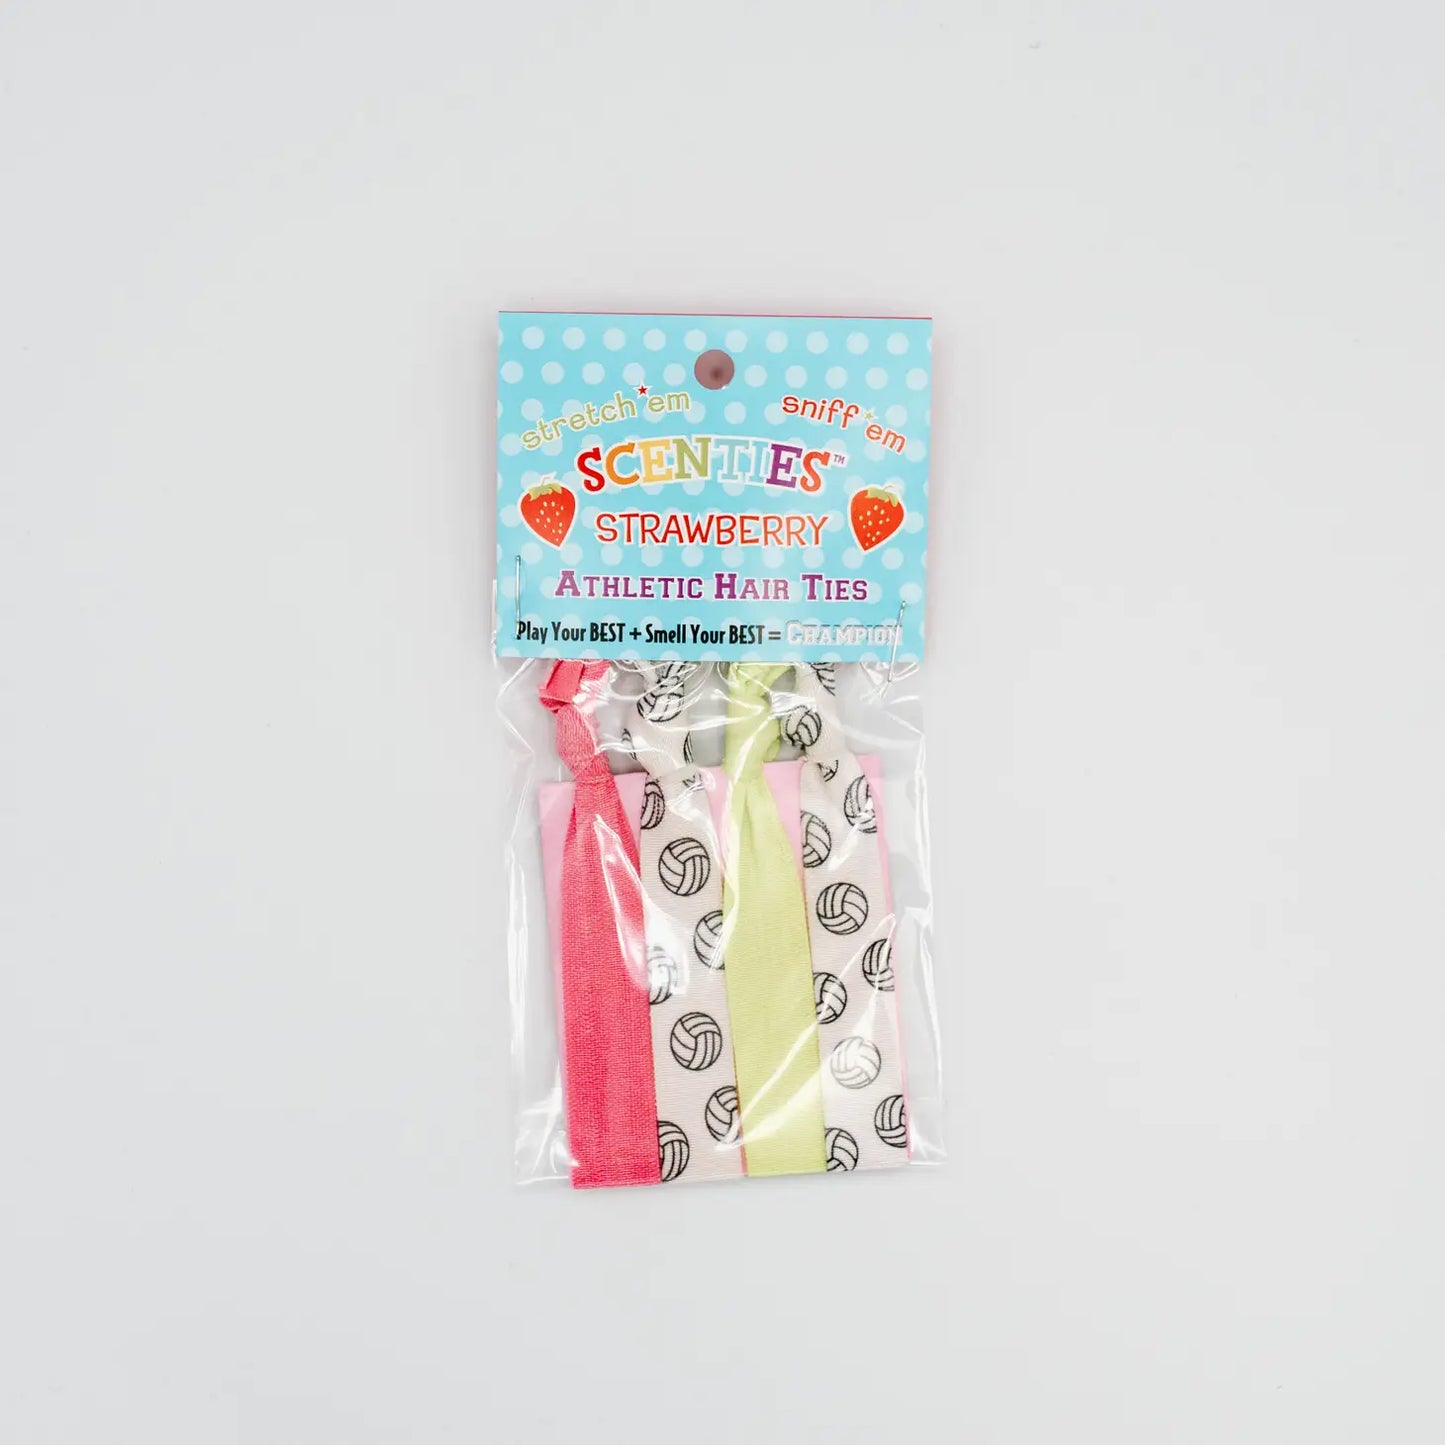 Volleyball Athletic Hair Ties Strawberry Scented